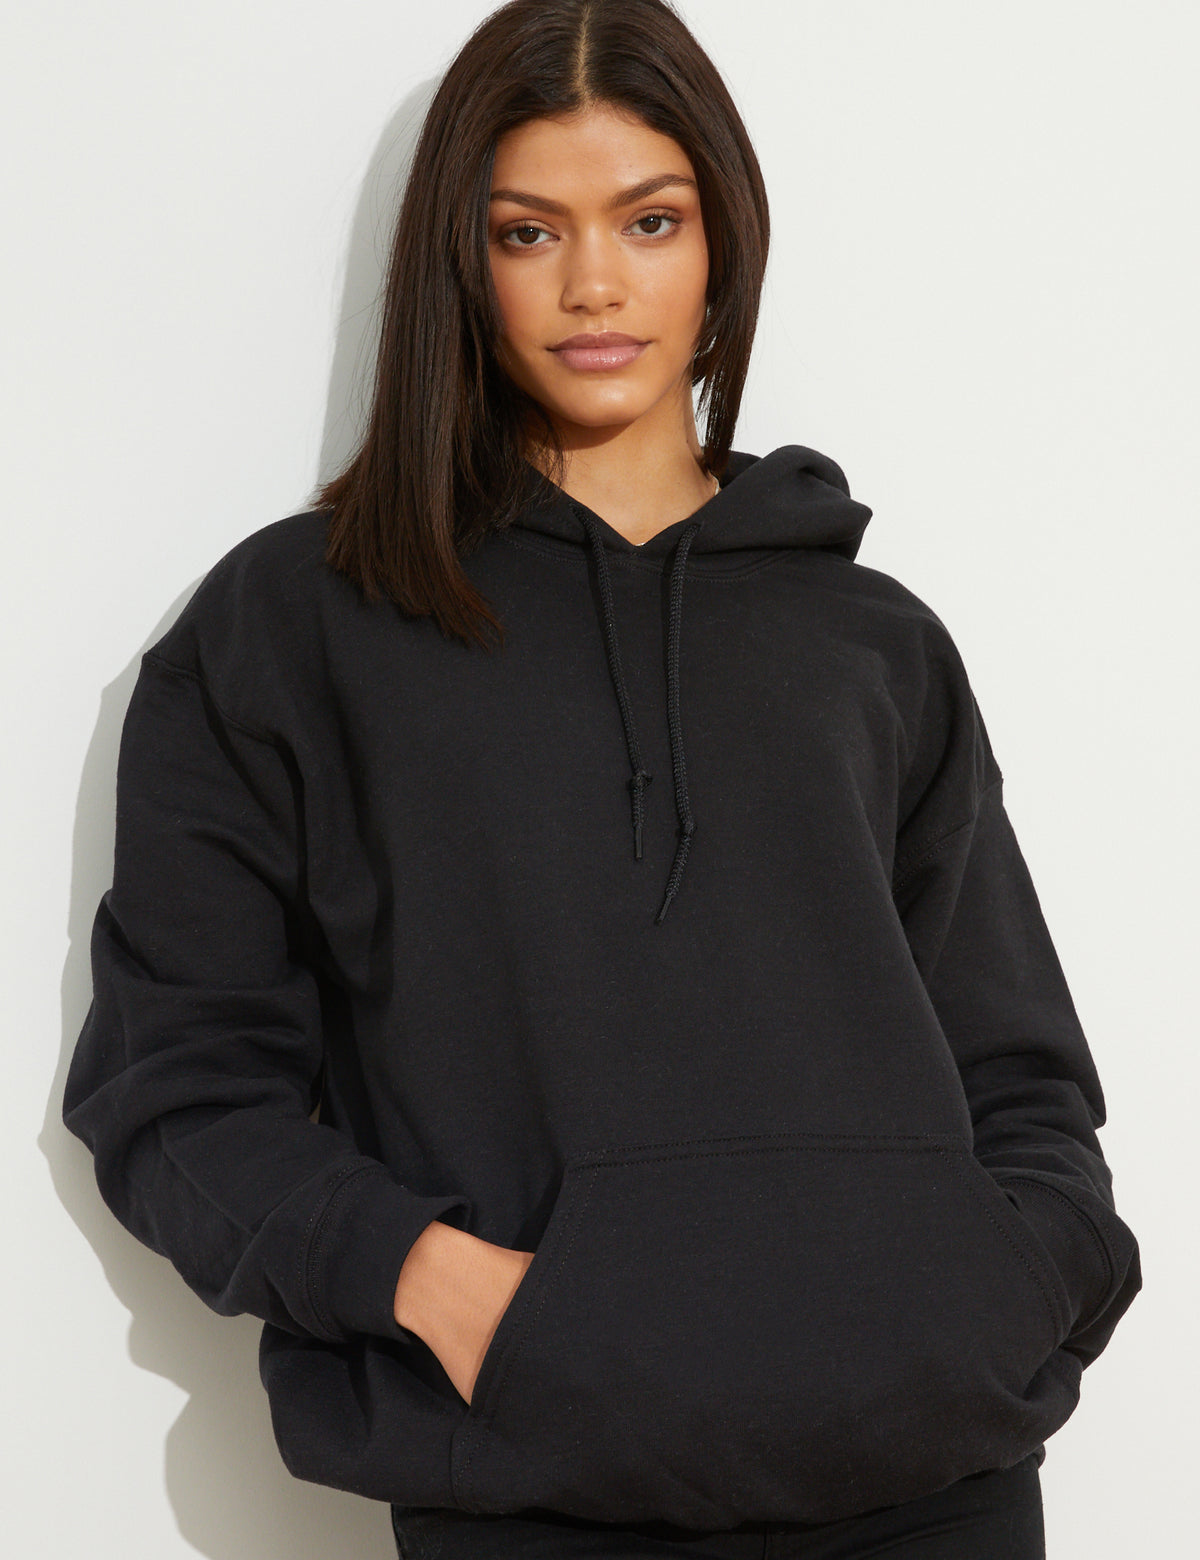 CEREAL BLACK HOOD - !! NEW STOCK !!